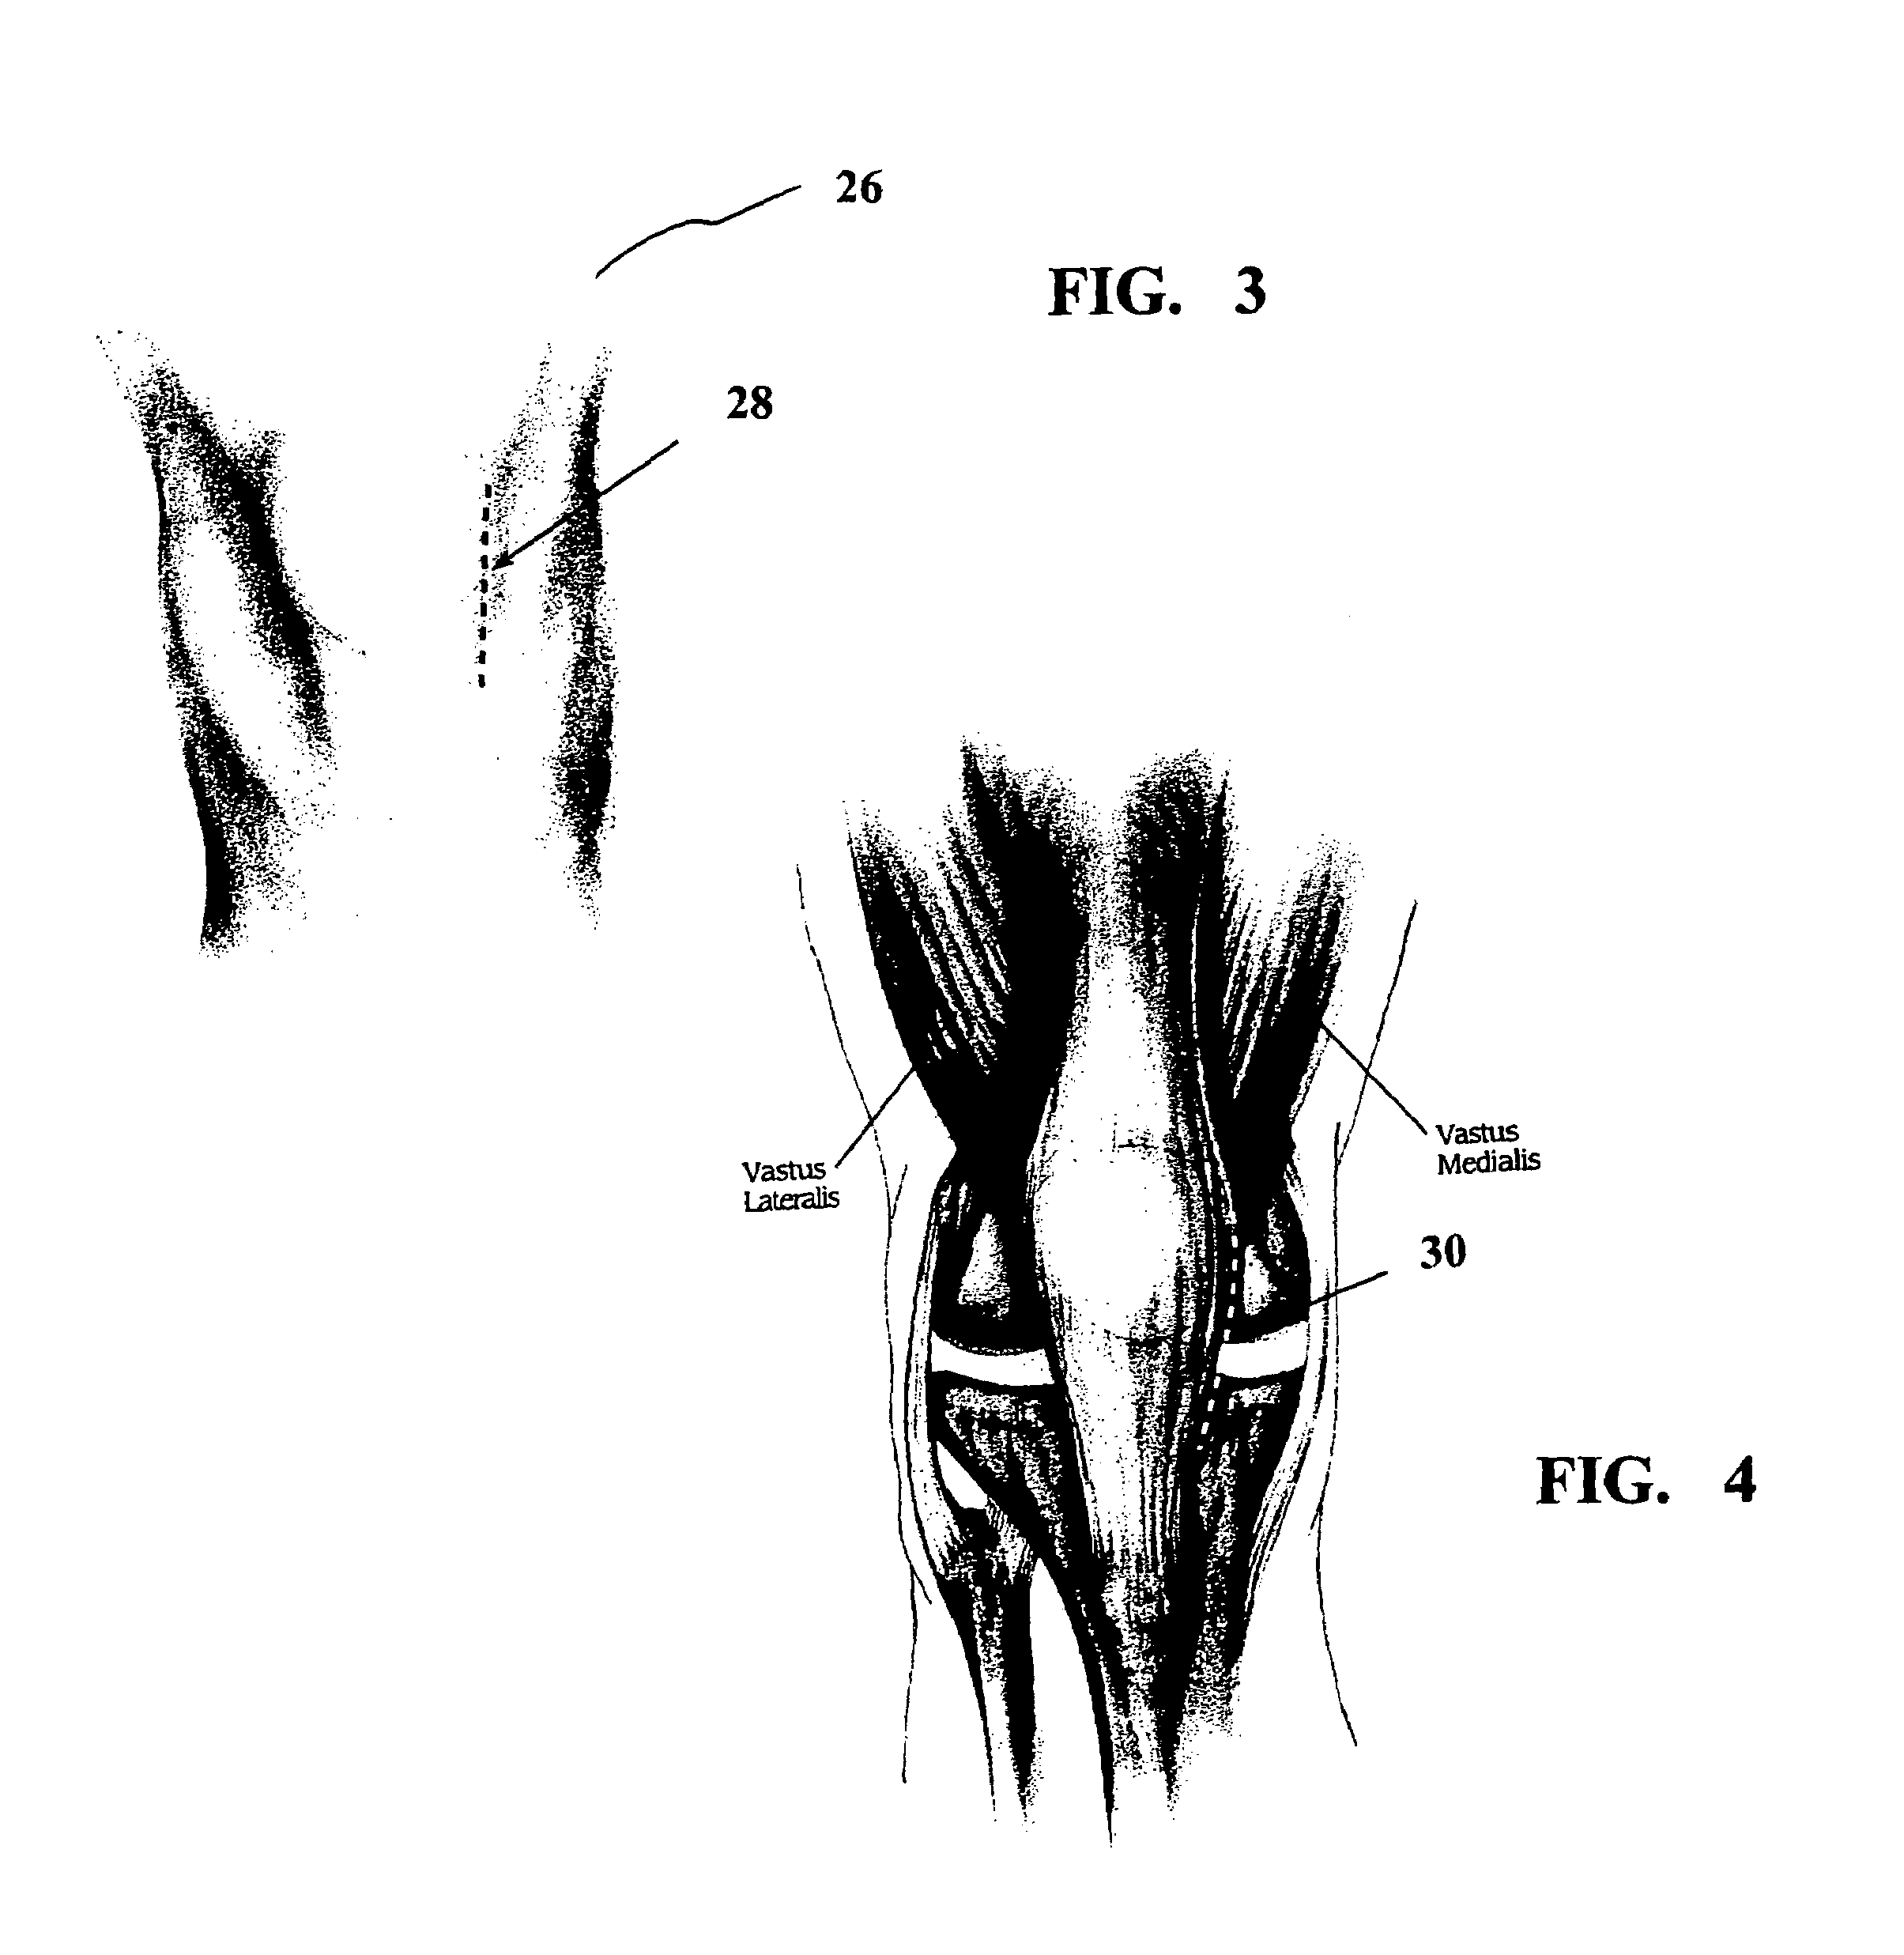 Method and apparatus for achieving correct limb alignment in unicondylar knee arthroplasty